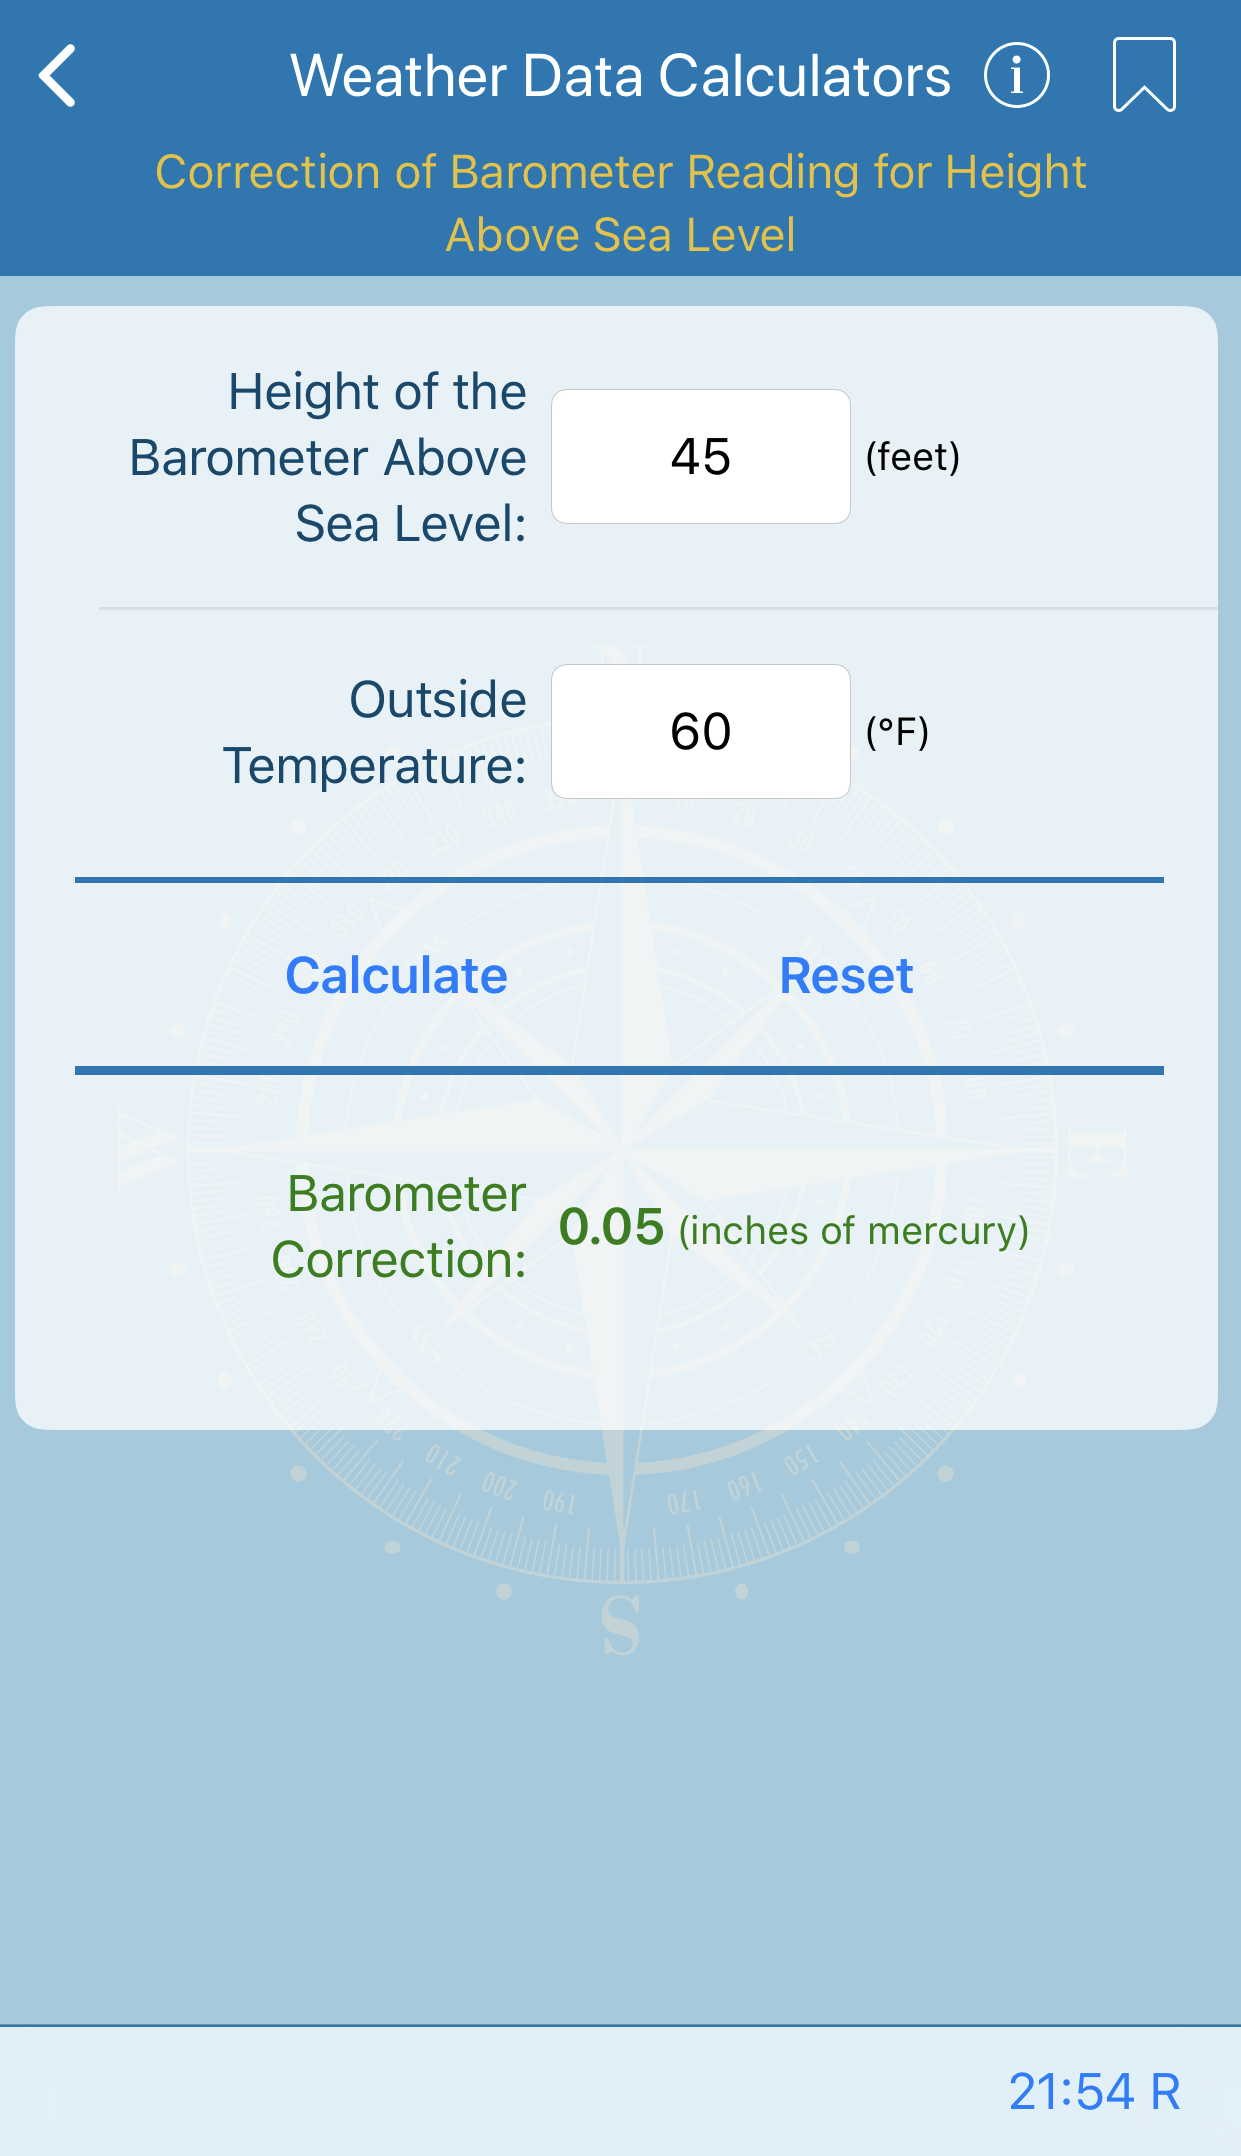 Correction of Barometer Reading for Height Above Sea Level